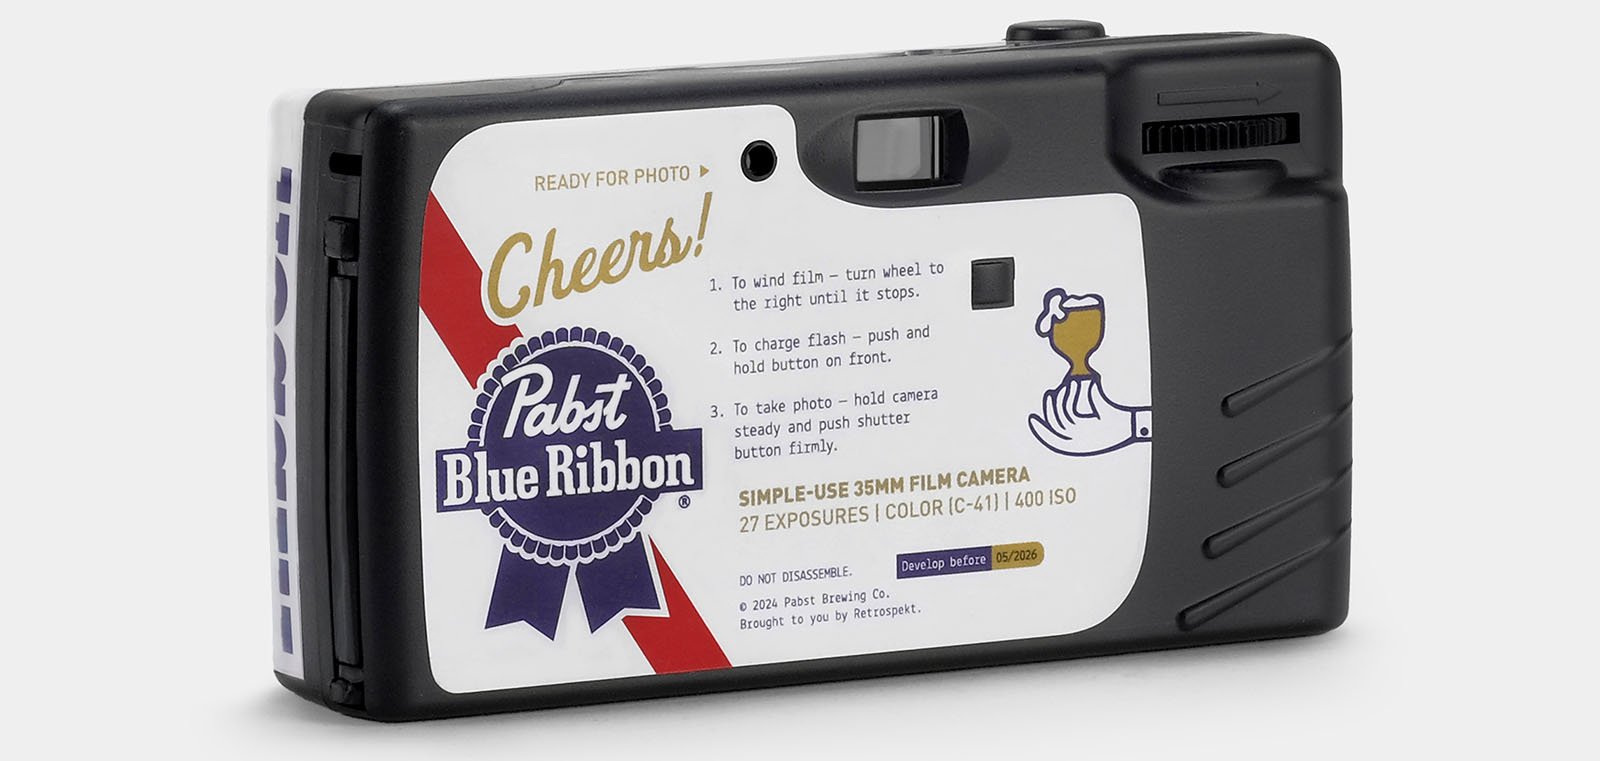 A black disposable 35mm film camera with a white sticker on the back. The sticker features brand elements of Pabst Blue Ribbon, including the logo, a ribbon, and a hand holding a glass. Instructions for use are also printed on the sticker.